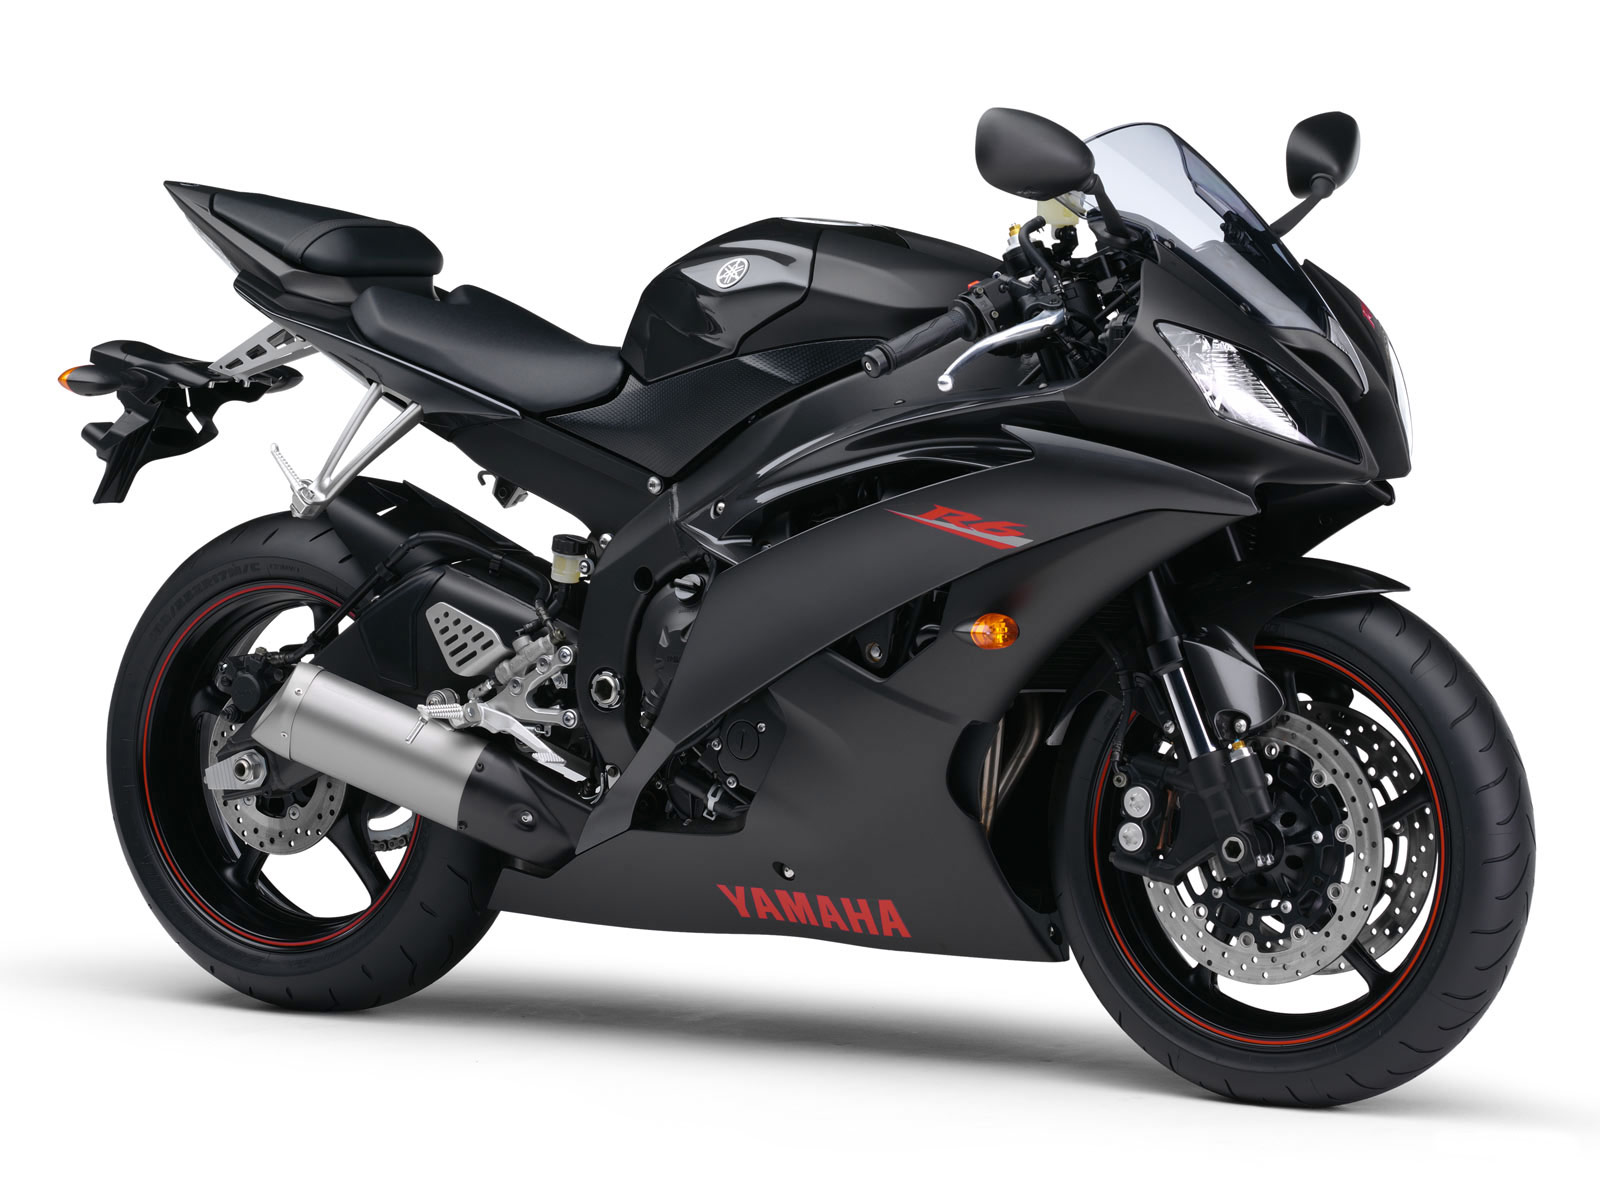 YZF-R6 Motorcycle pictures, review and specifications 2008 Yamaha